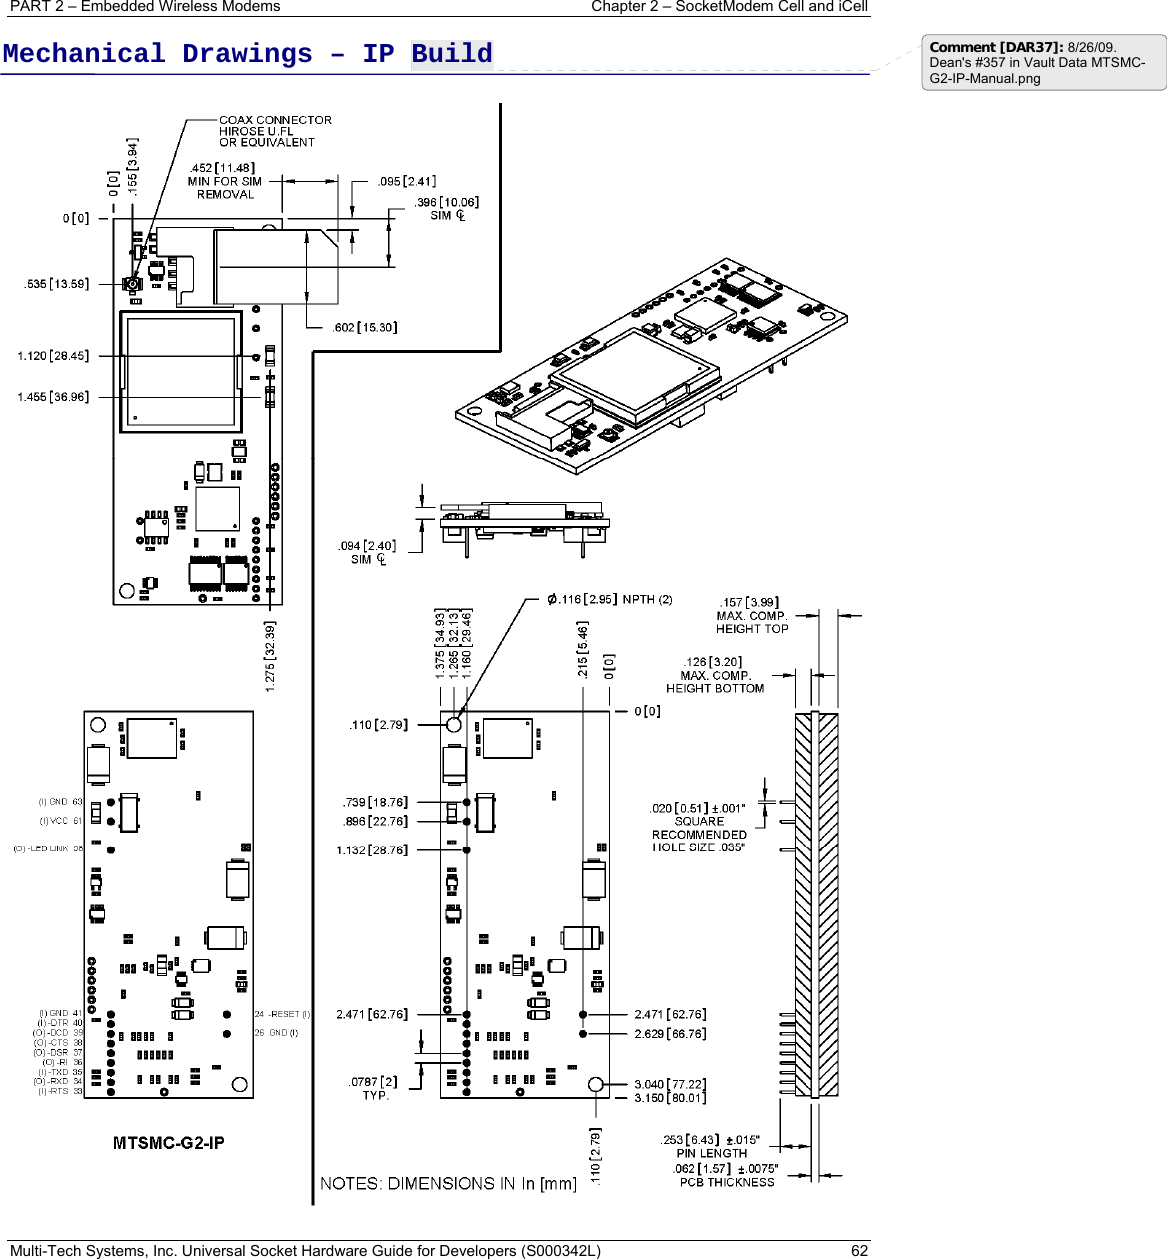 PART 2 – Embedded Wireless Modems   Chapter 2 – SocketModem Cell and iCell Multi-Tech Systems, Inc. Universal Socket Hardware Guide for Developers (S000342L)  62  Mechanical Drawings – IP Build  Comment [DAR37]: 8/26/09. Dean&apos;s #357 in Vault Data MTSMC-G2-IP-Manual.png 